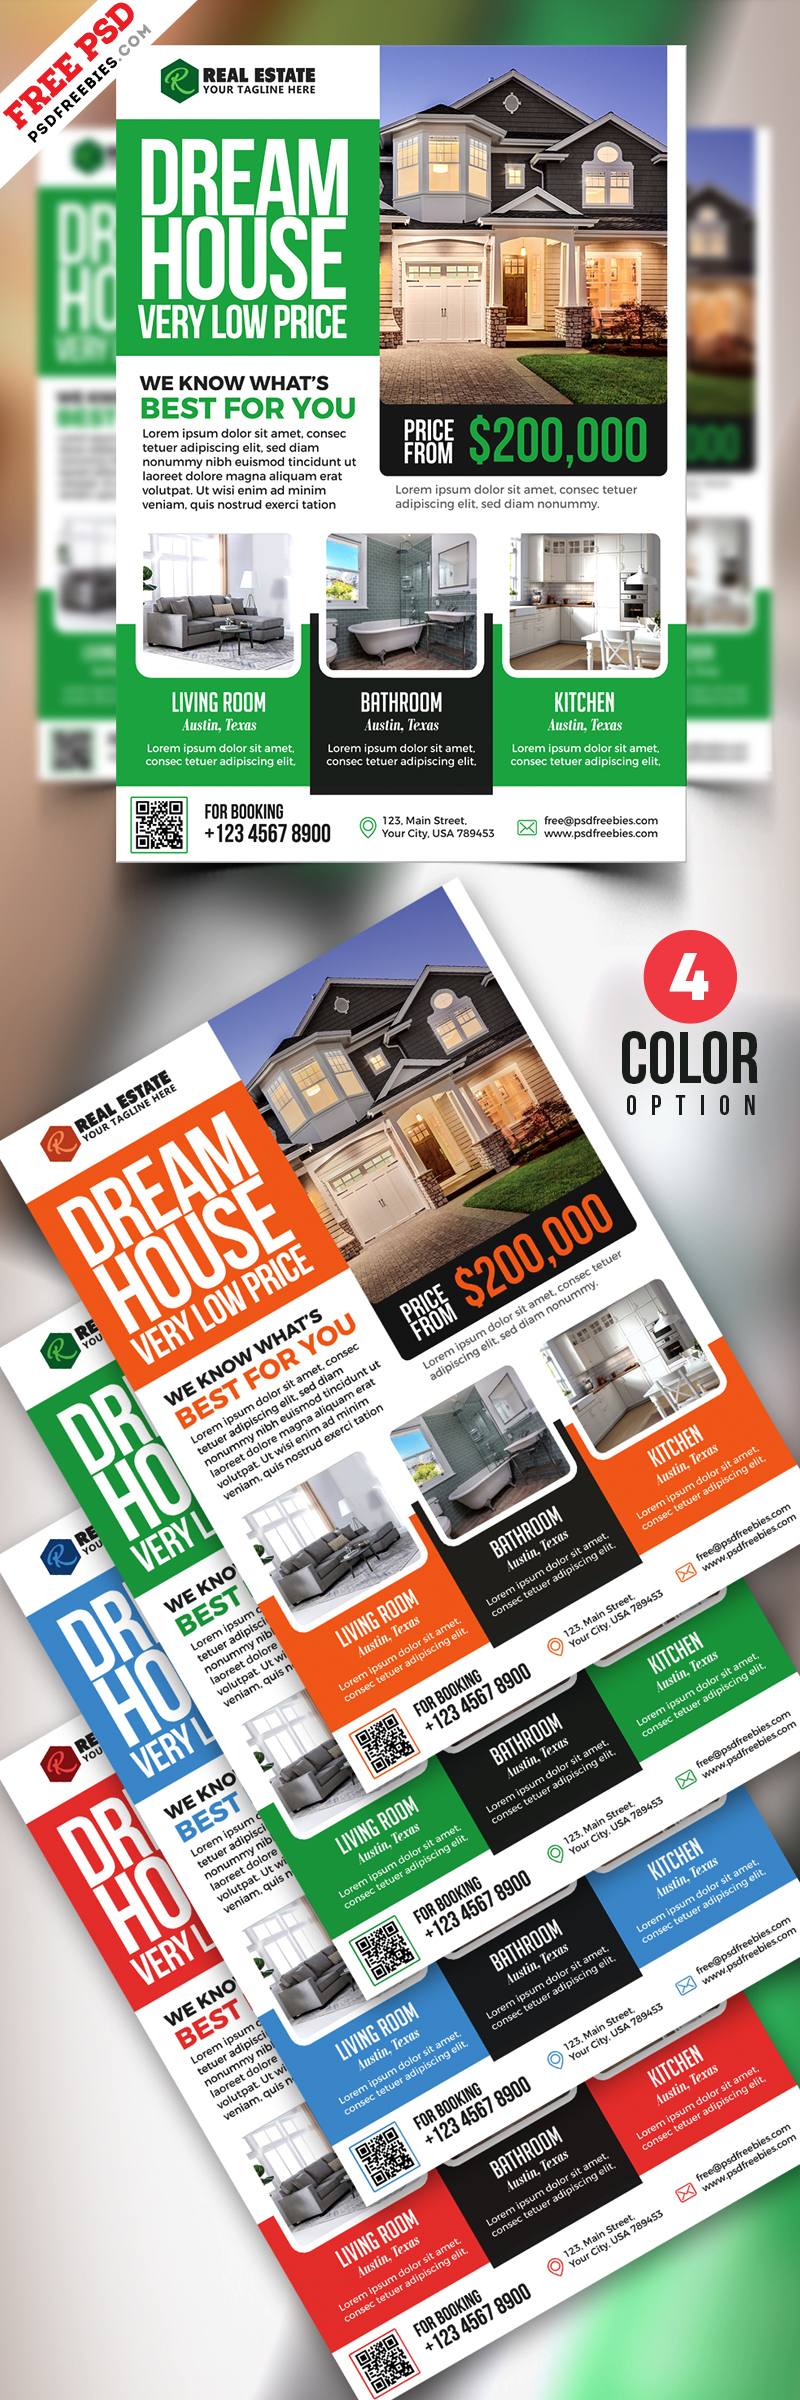 PSD Real Estate Flyer Templates – PSDFreebies.com Within Real Estate Brochure Templates Psd Free Download